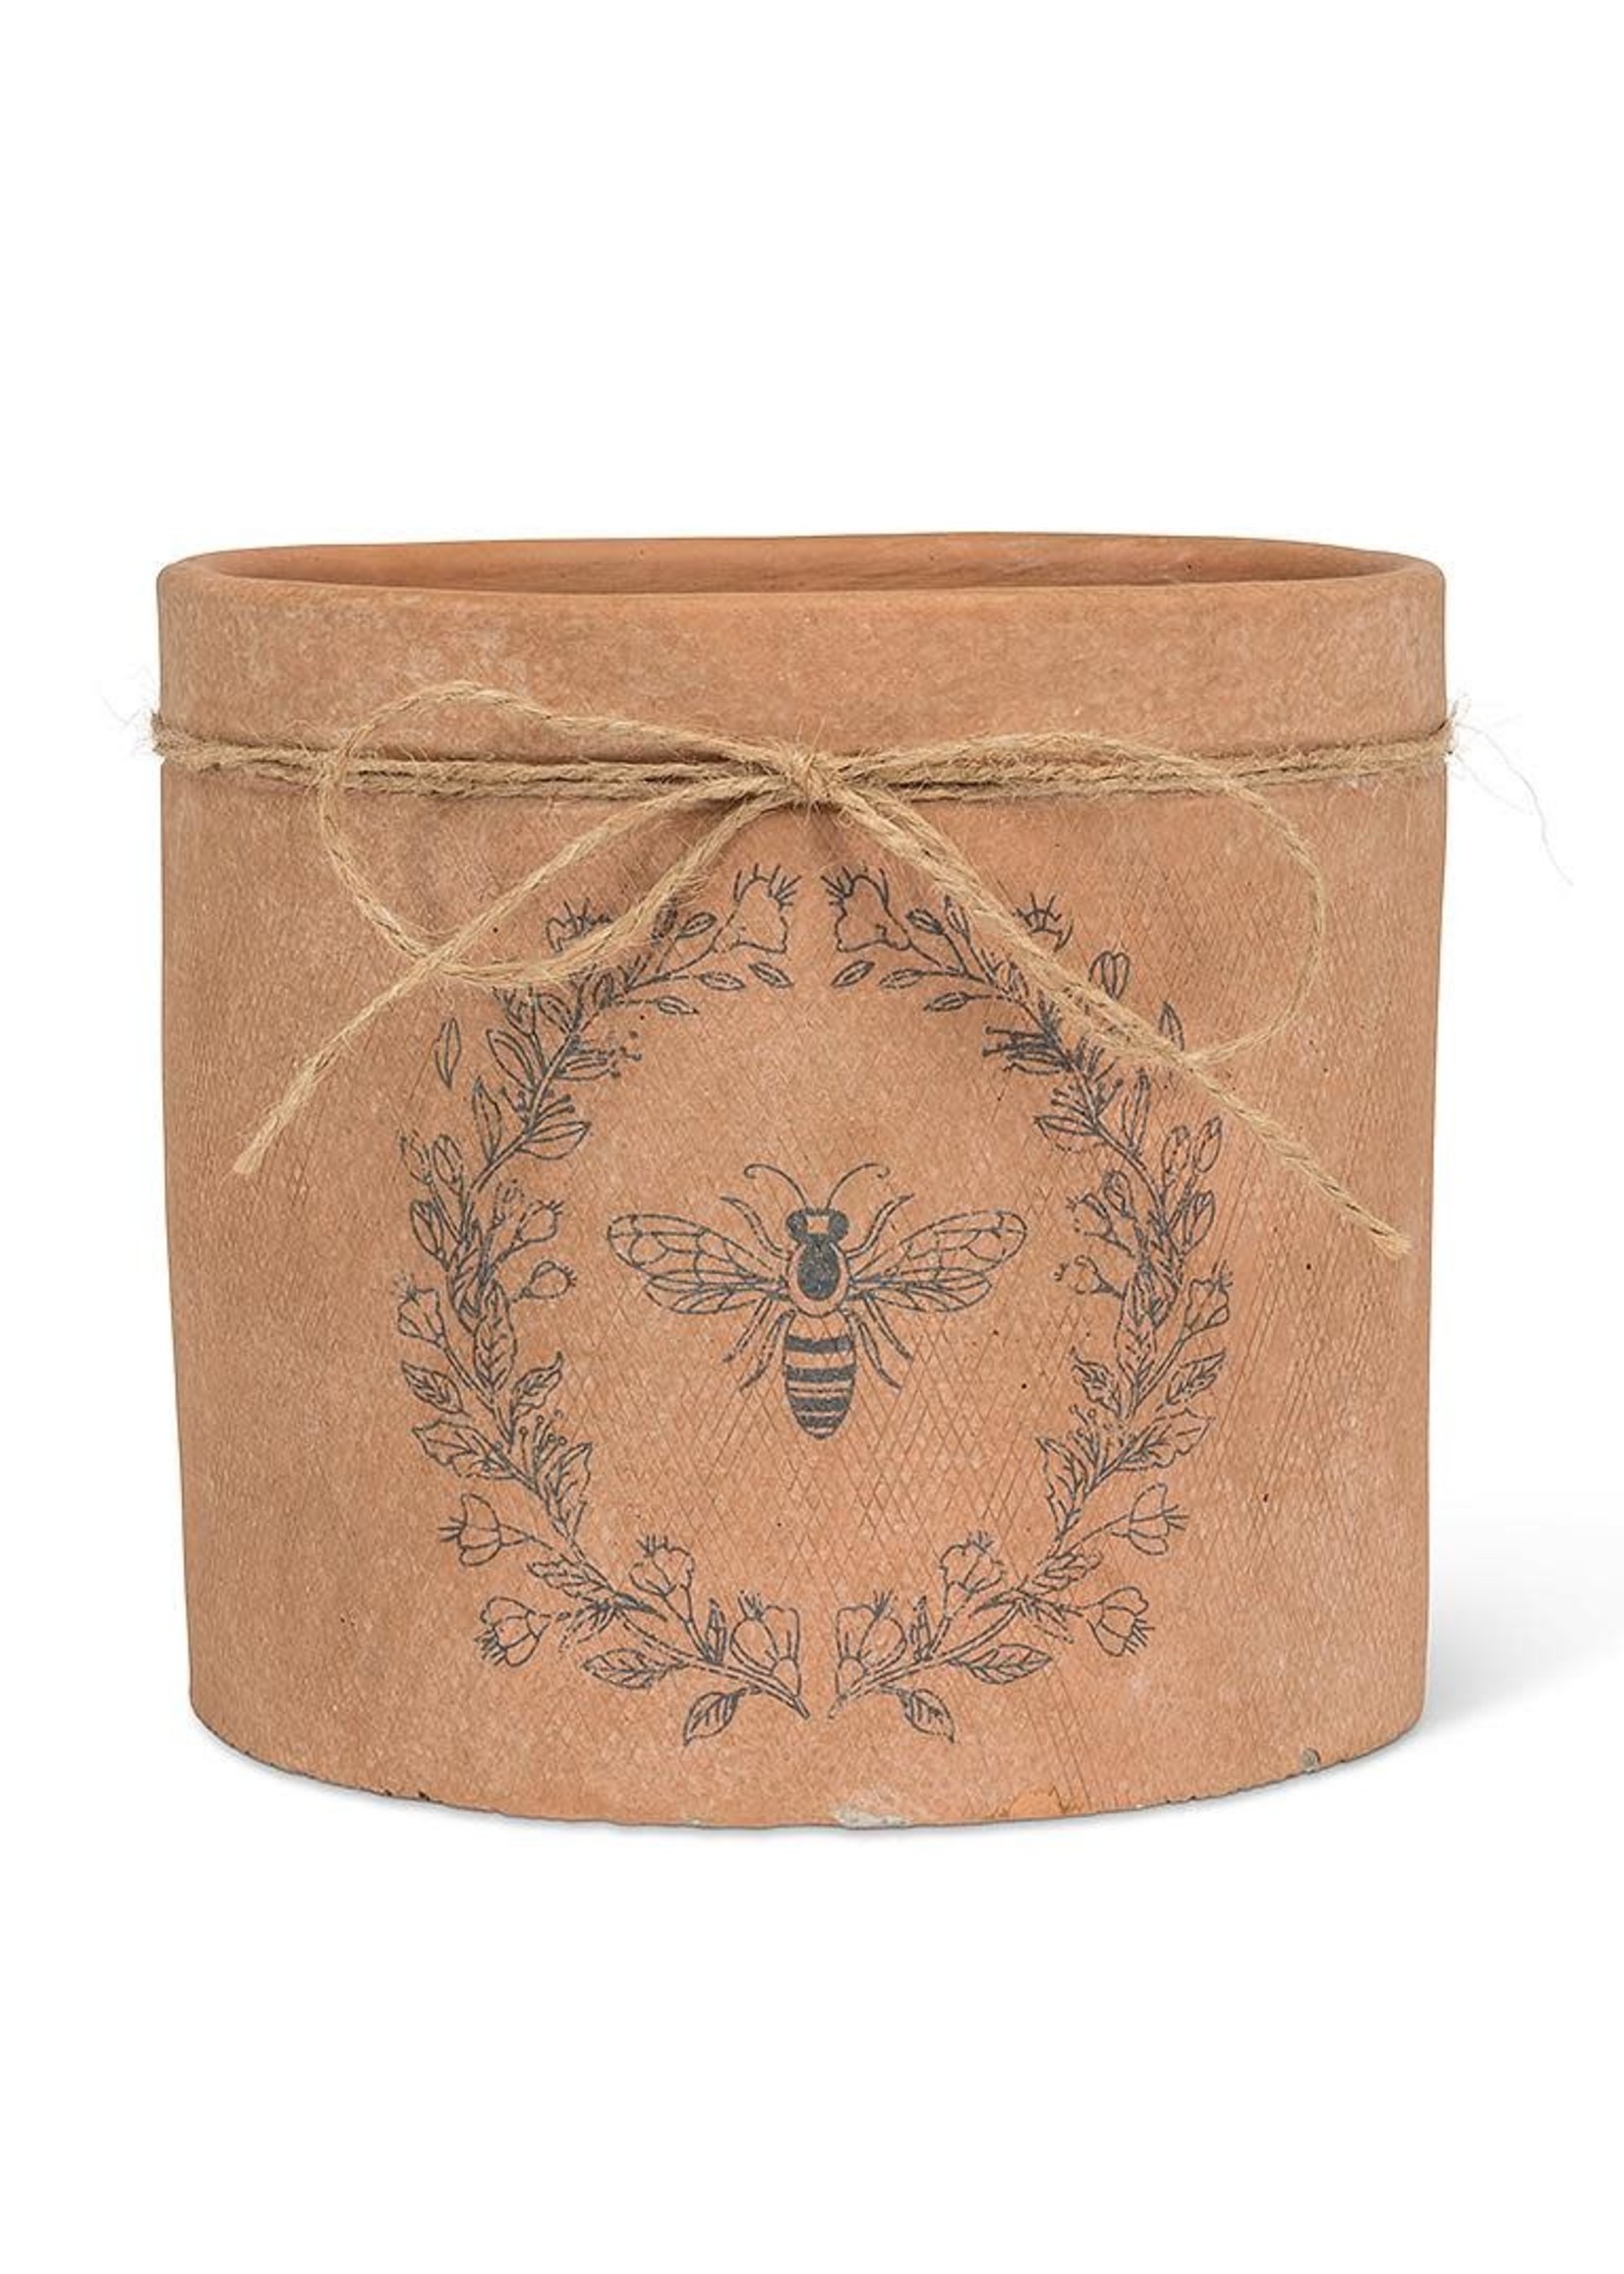 Bee Crest in Planter - Large 7"